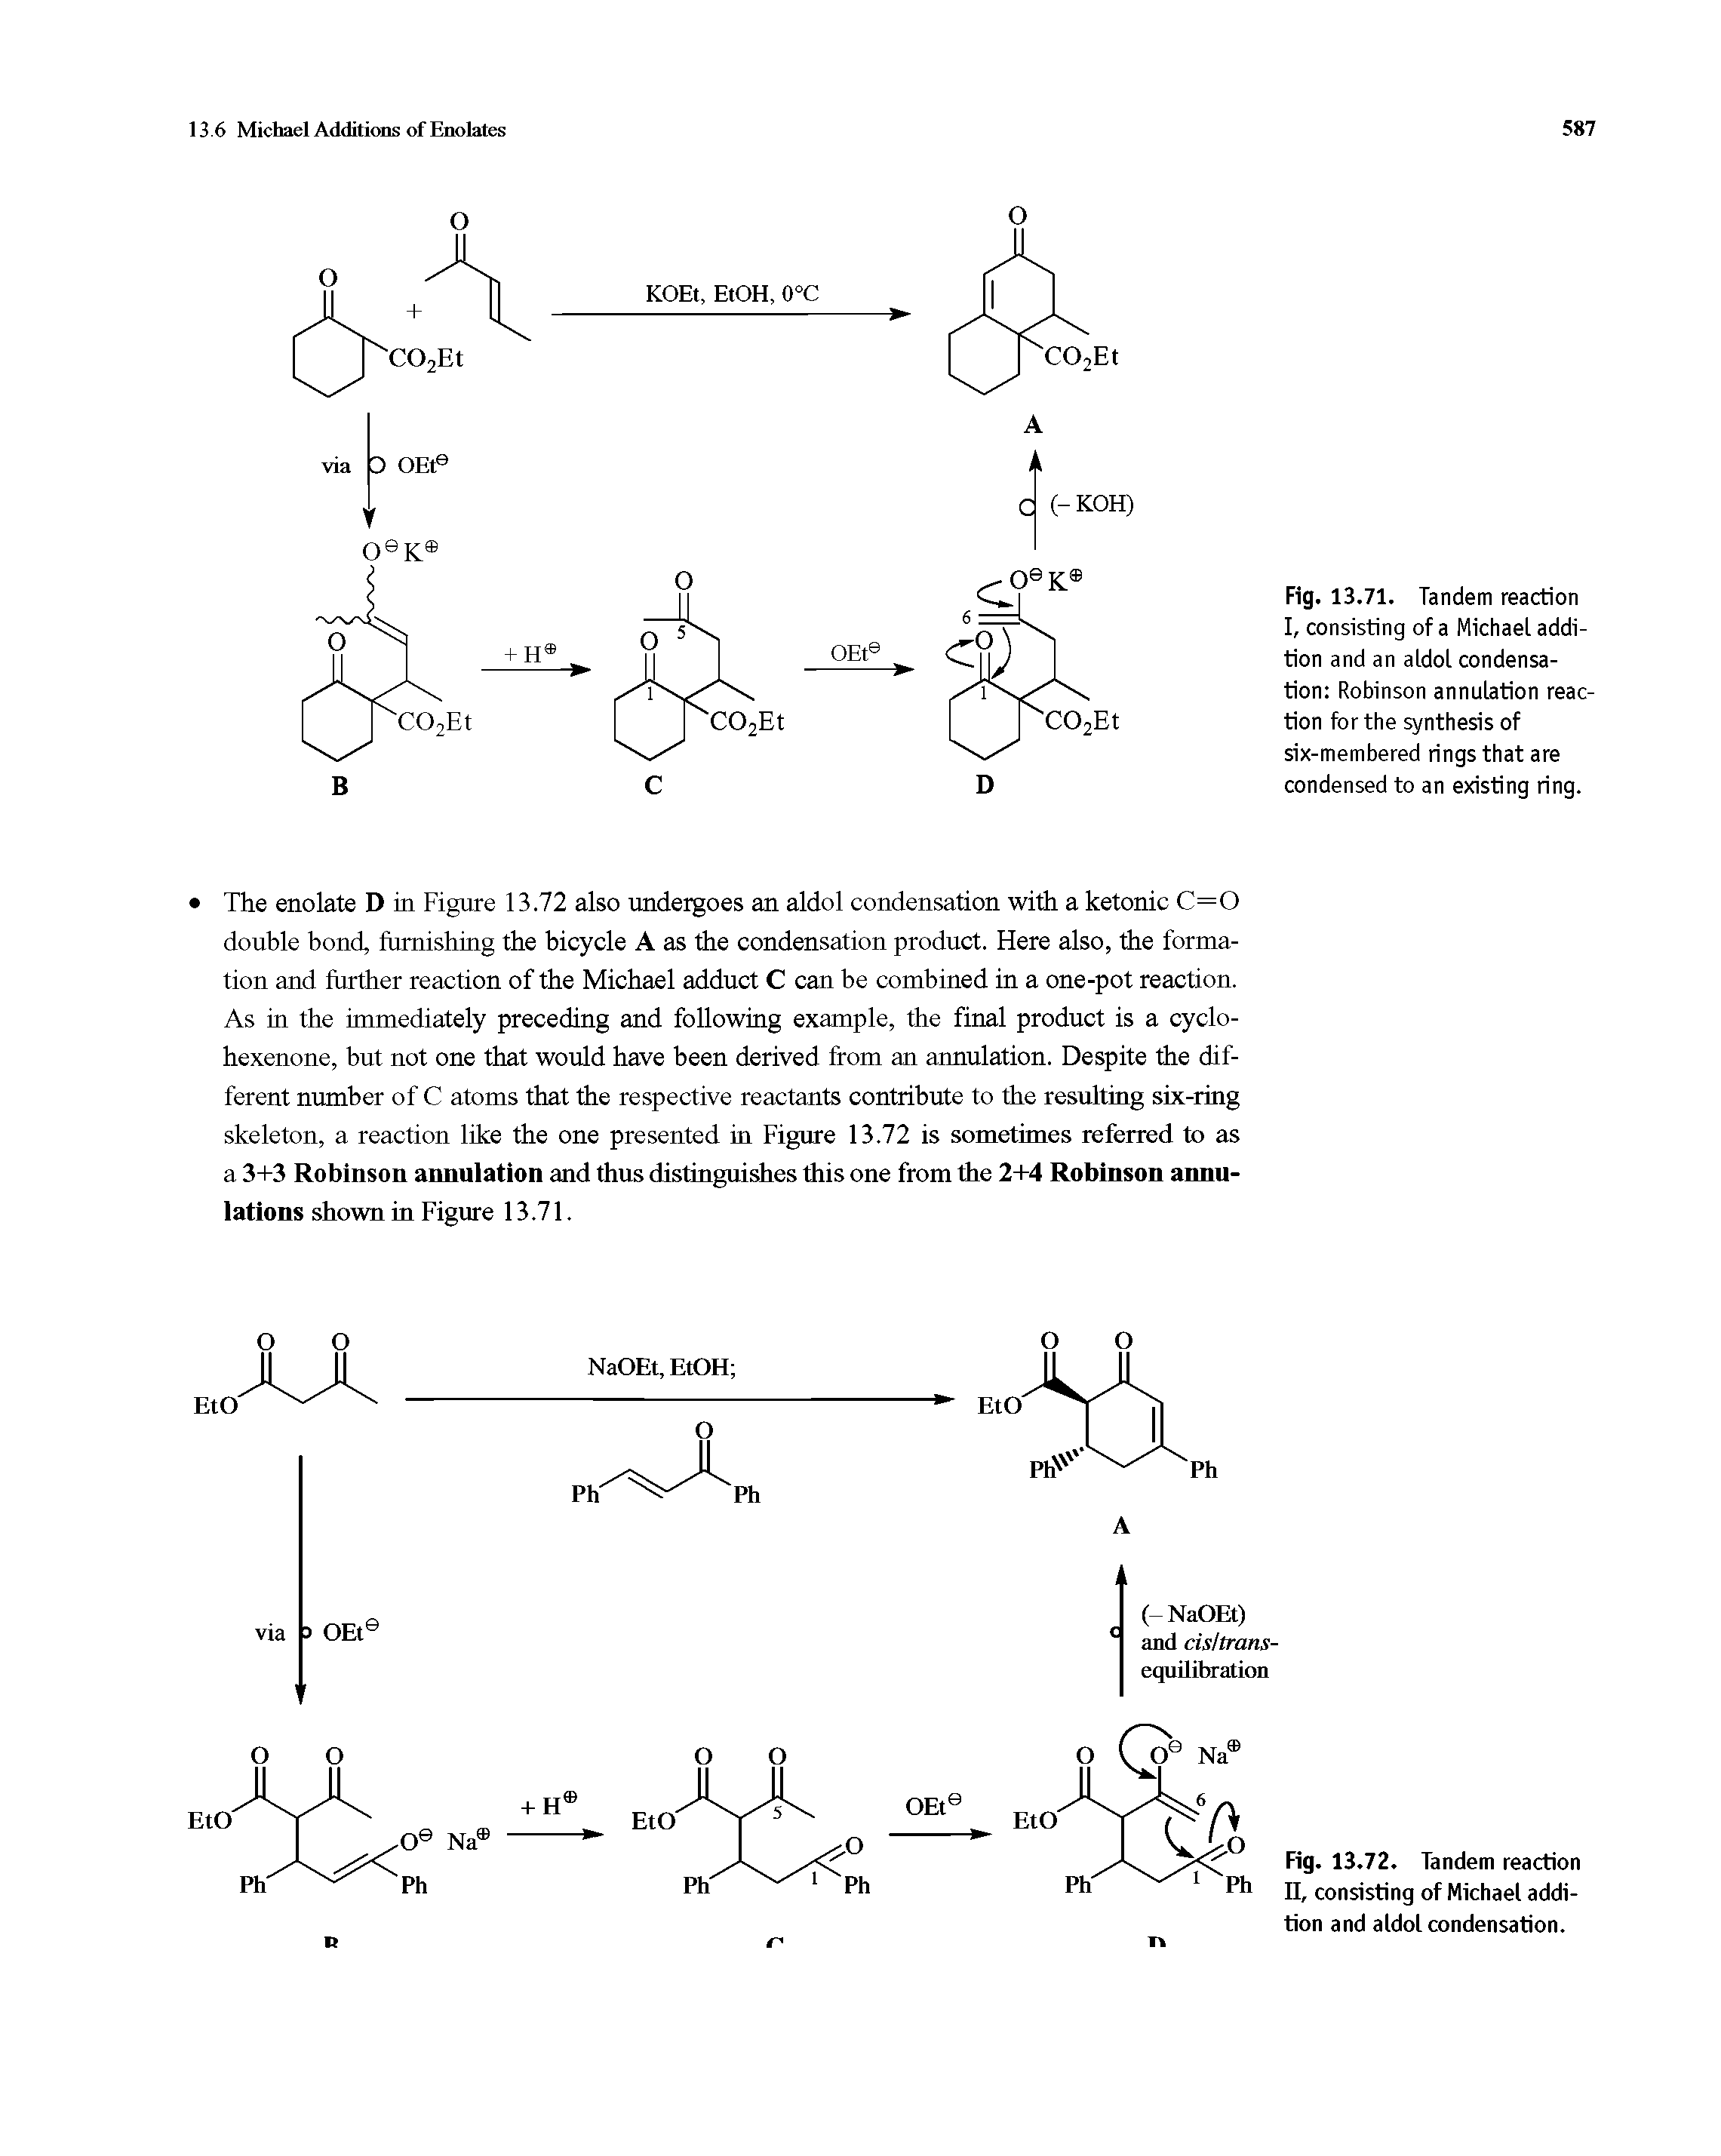 Fig. 13.72. Tandem reaction II, consisting of Michael addition and aldol condensation.